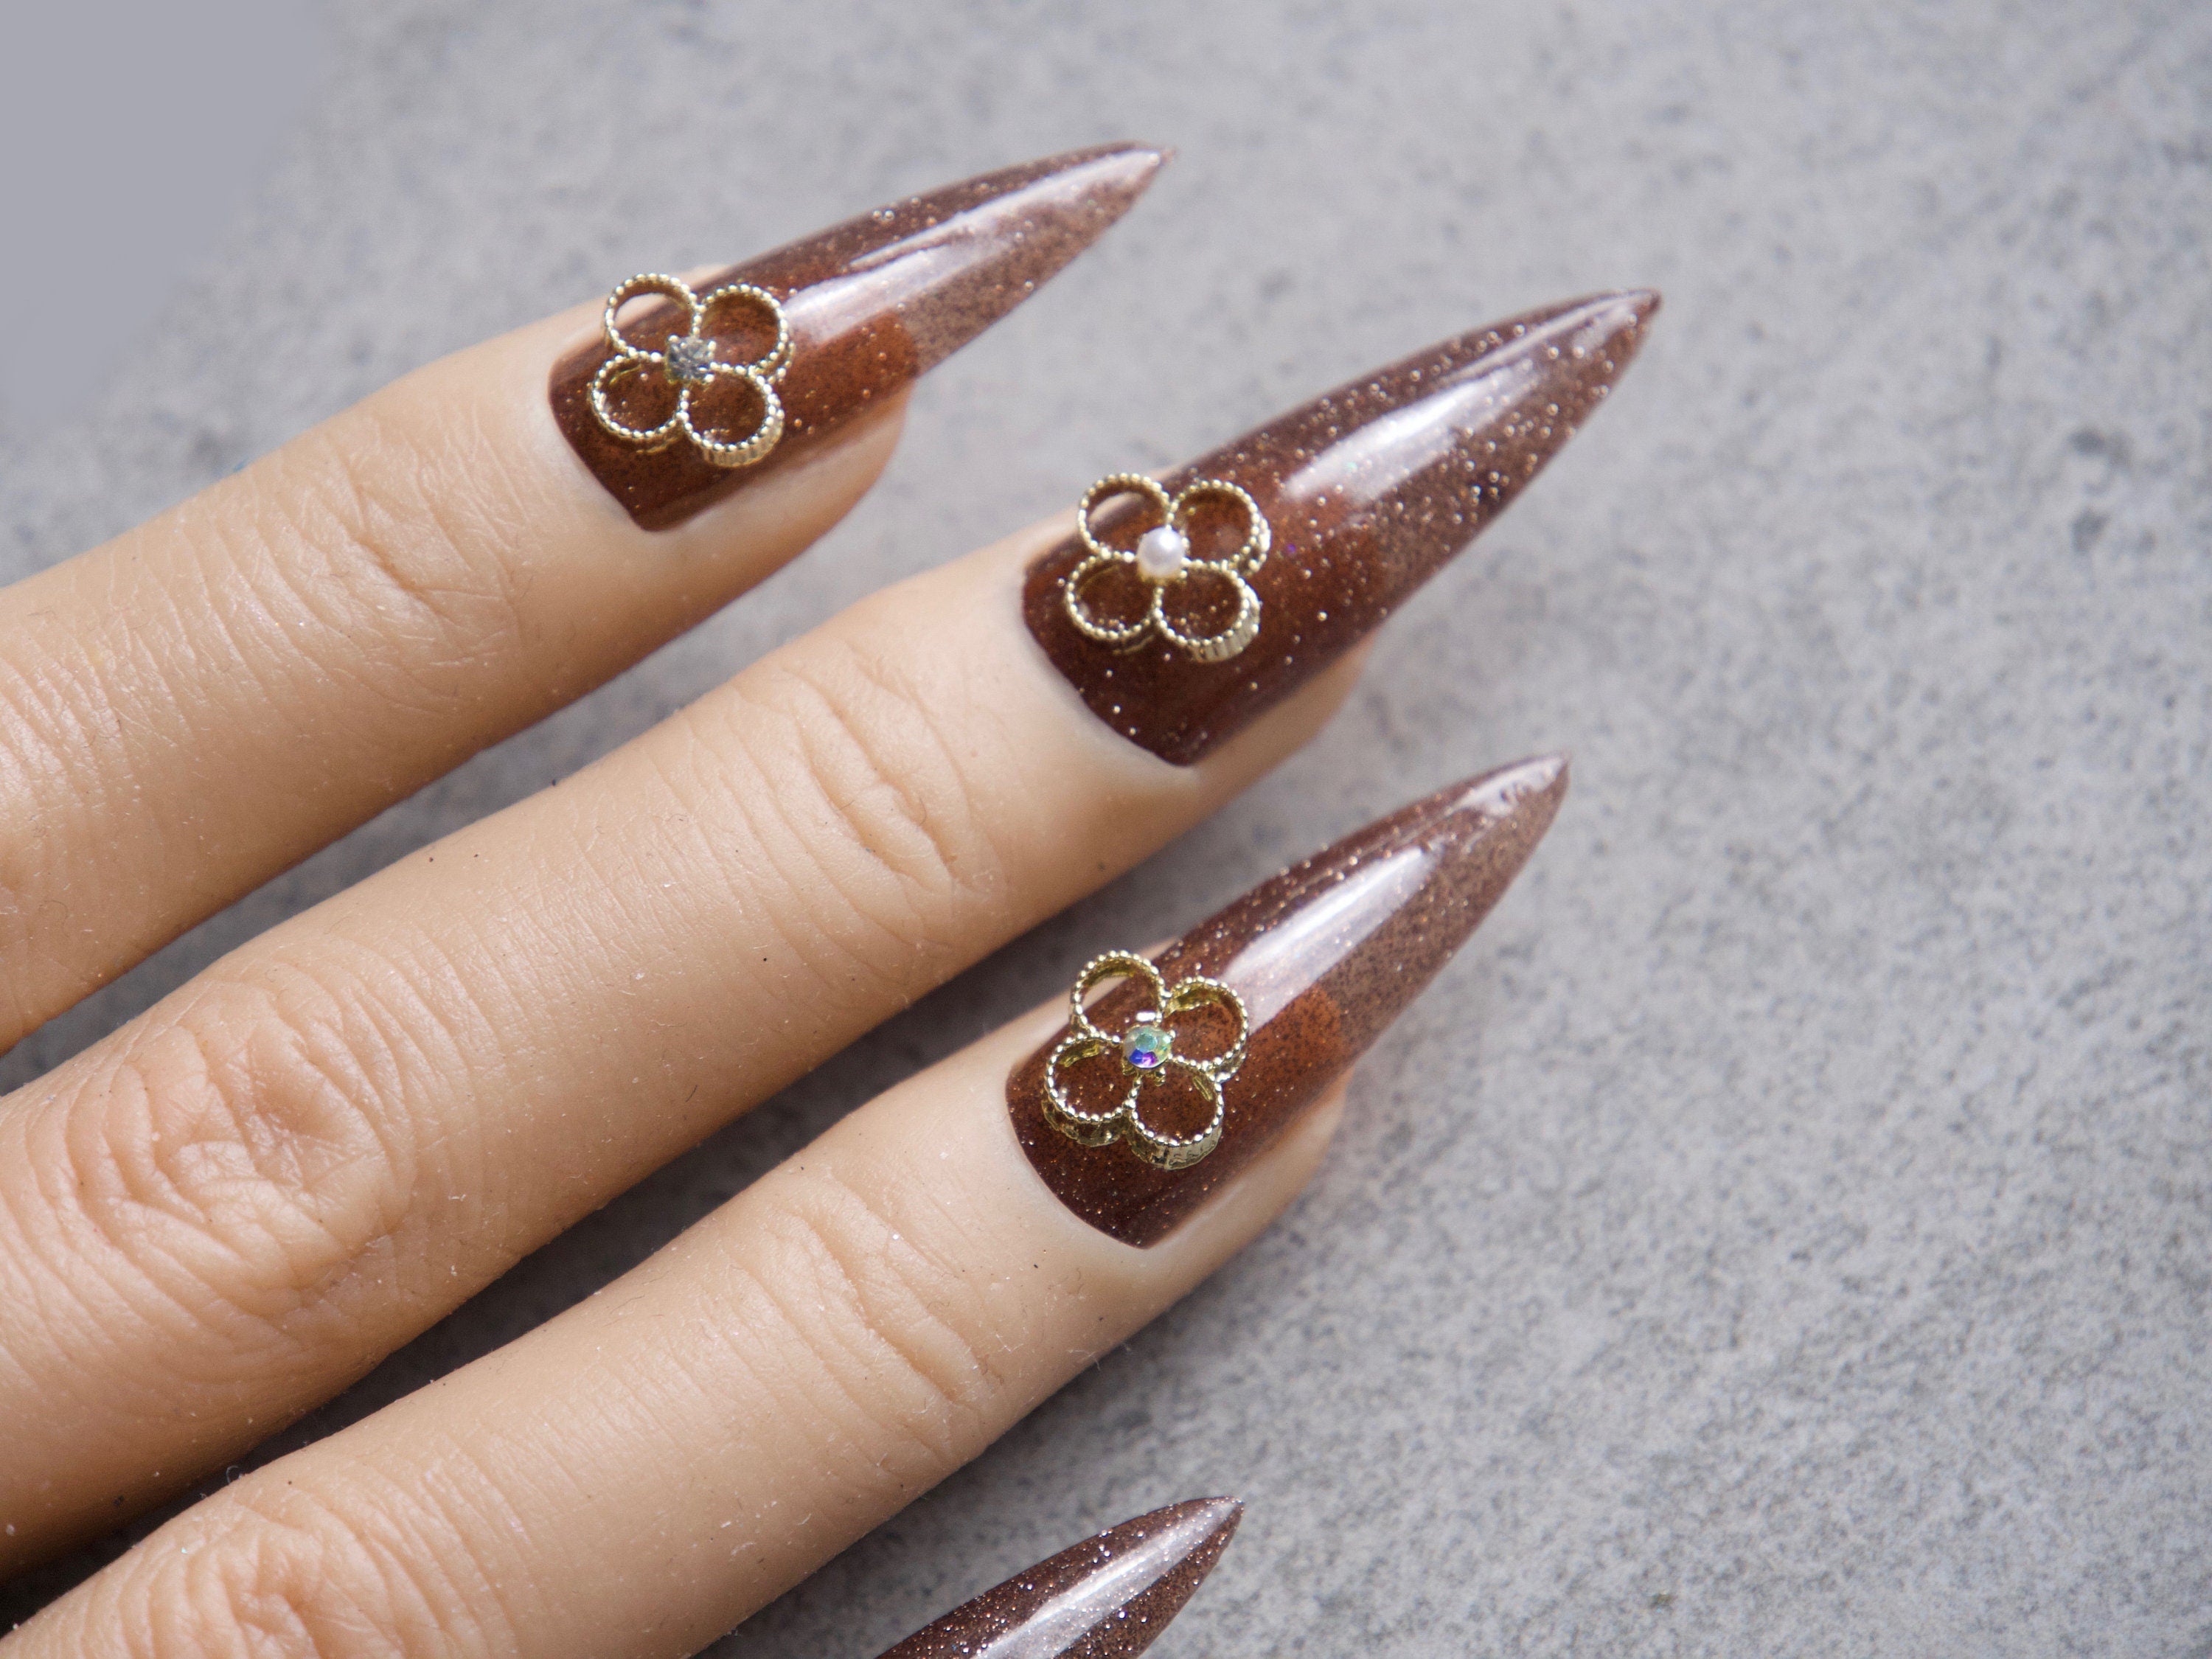 Amazing 3d Flower nail art design on tinted glass nails. Stock Photo |  Adobe Stock